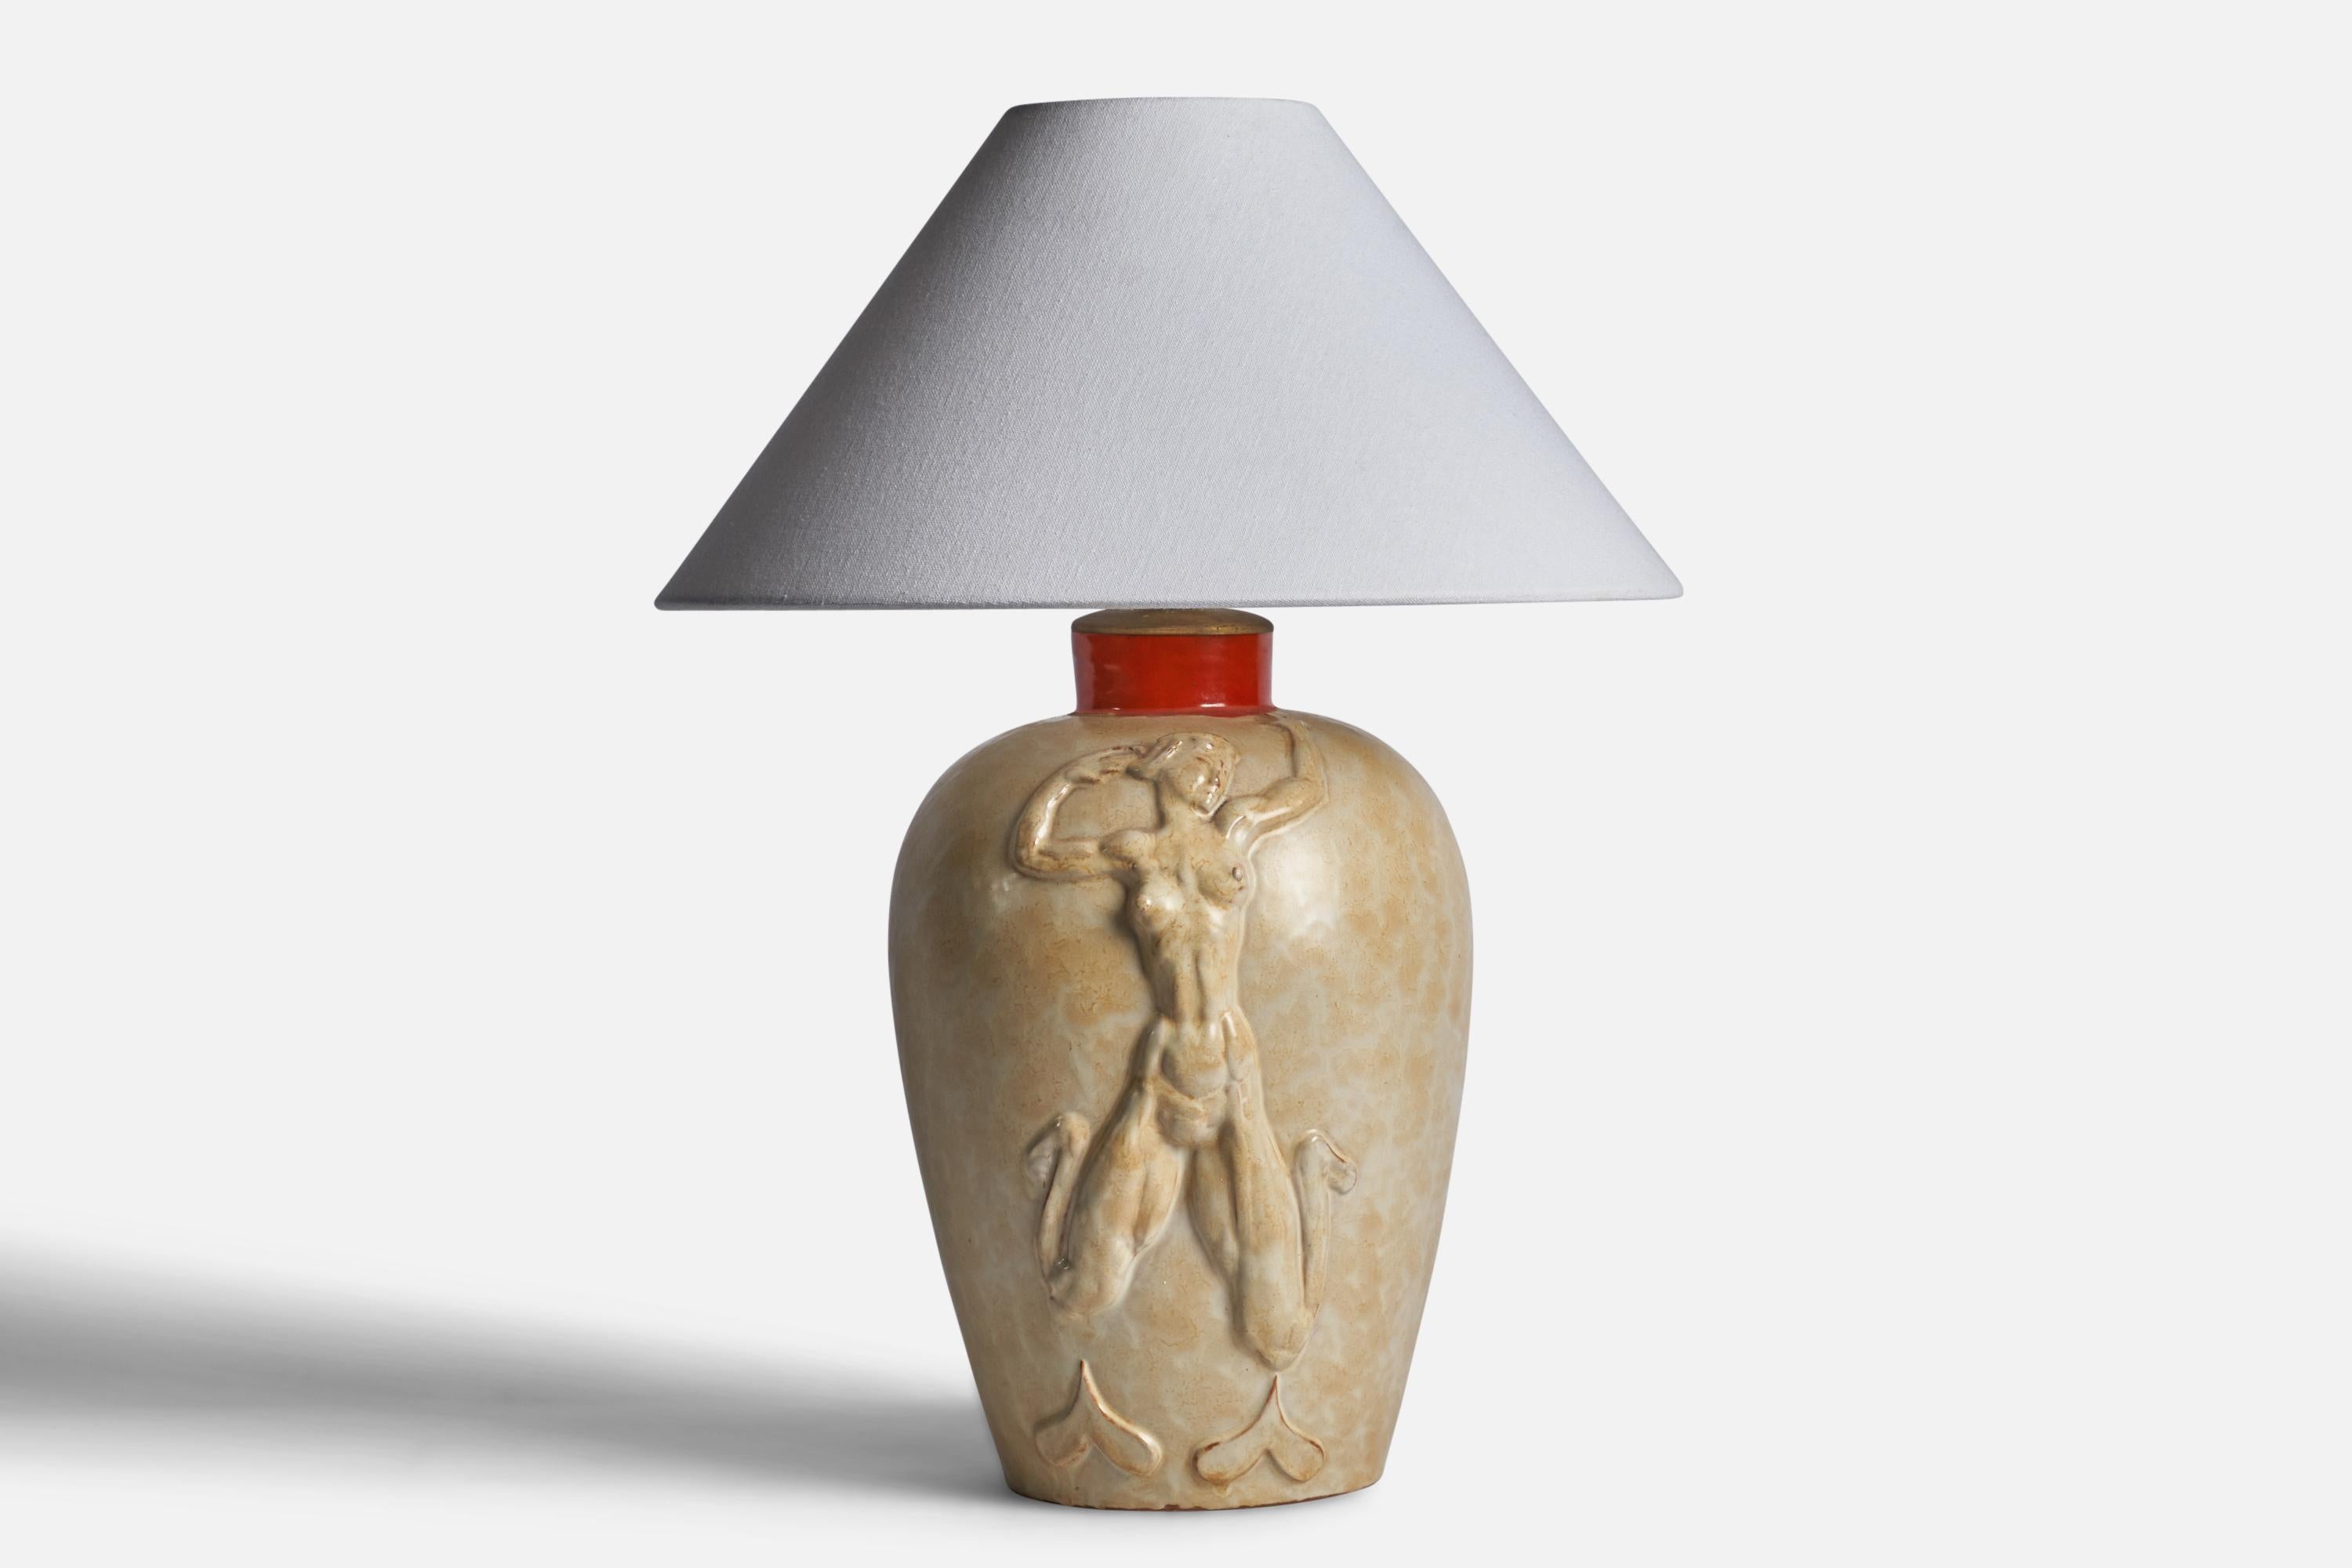 A beige and orange-glazed earthenware table lamp designed by Einar Luterkort and produced by Upsala Ekeby, Sweden, 1930s.

Dimensions of Lamp (inches): 16” H x 9.5” Diameter
Dimensions of Shade (inches): 4.5” Top Diameter x 15.75” Bottom Diameter x